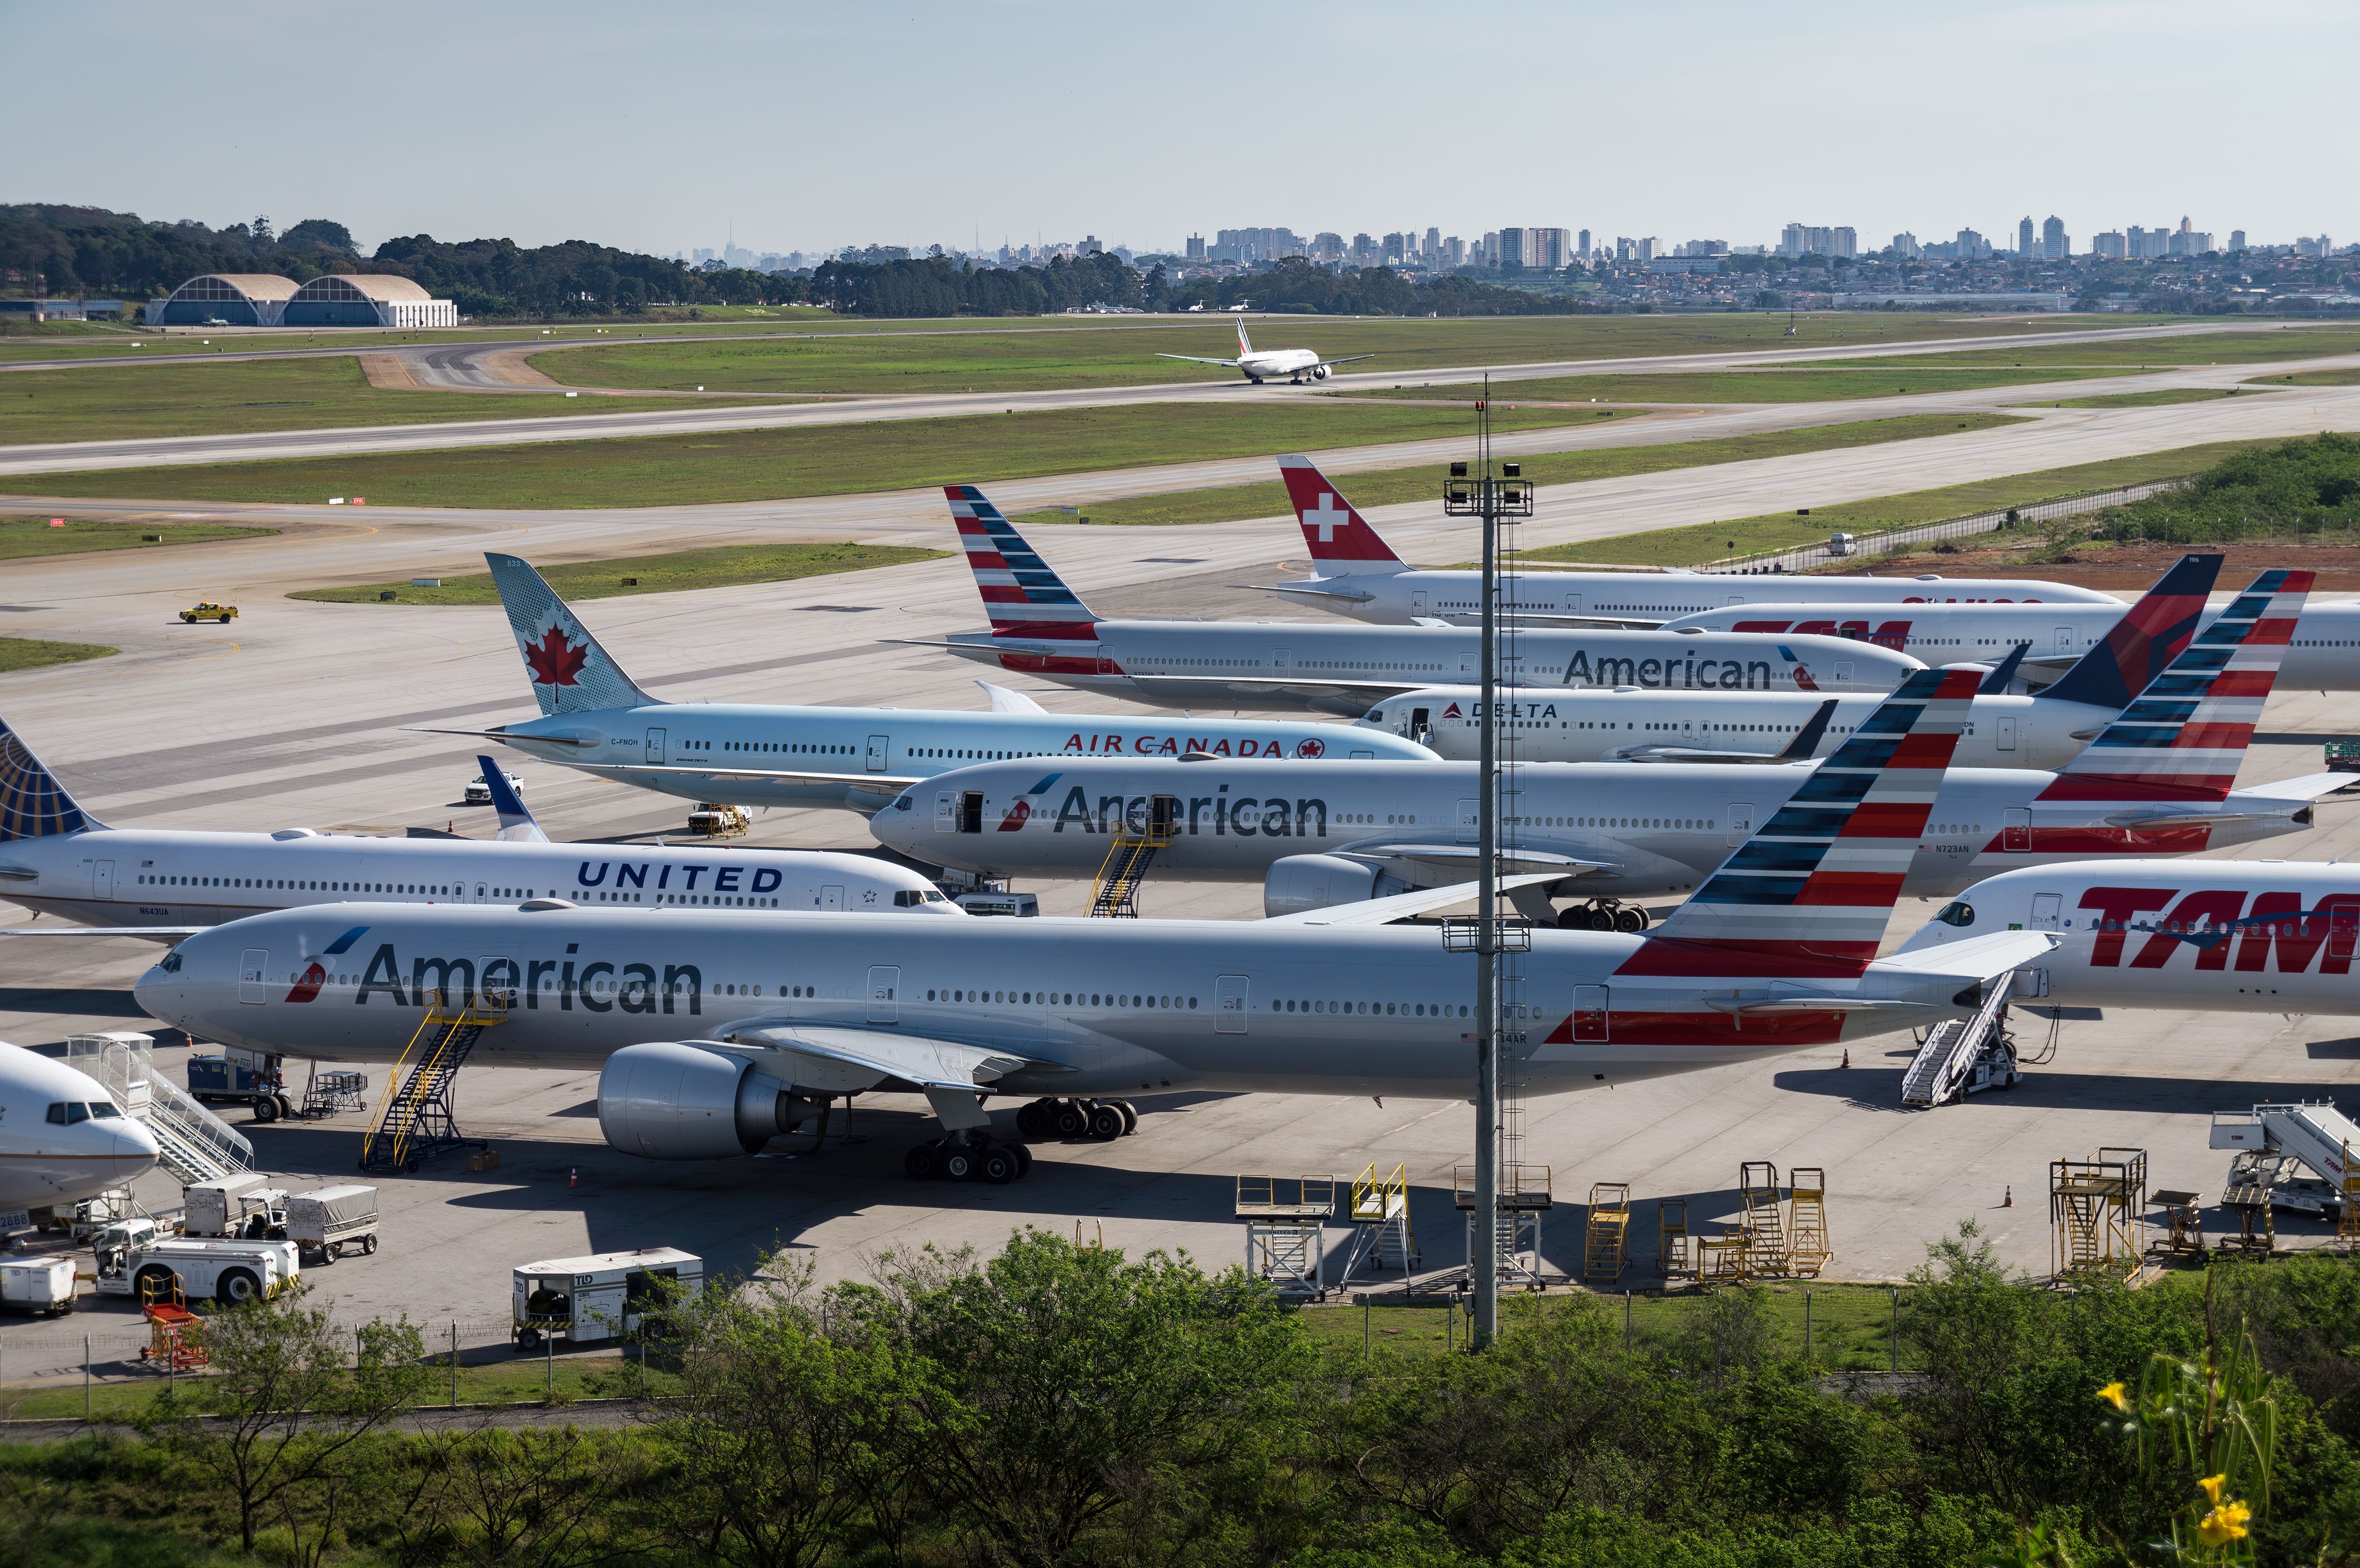 Aircraft of various airlines, such as Unites, American, Air Canada, and SWISS, parked on an airport apron.